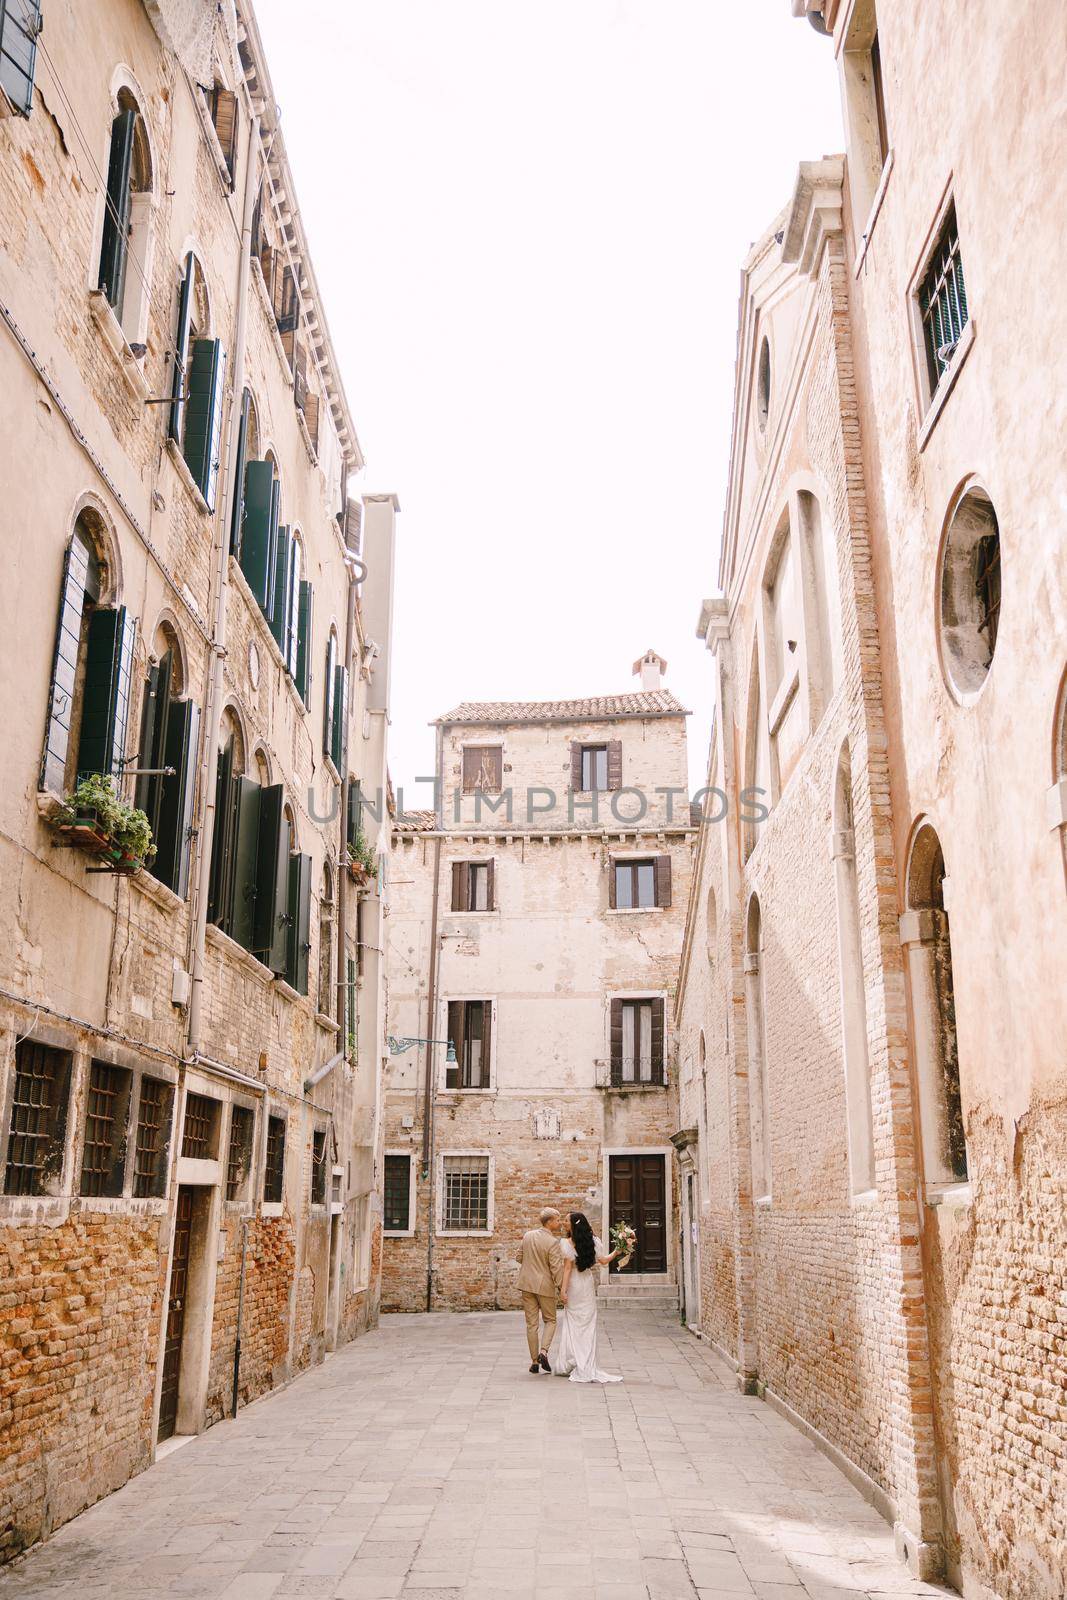 Italy wedding in Venice. The bride and groom walk along the deserted streets of the city. Newlyweds are walking in a dead end alley on the background of brick buildings. by Nadtochiy